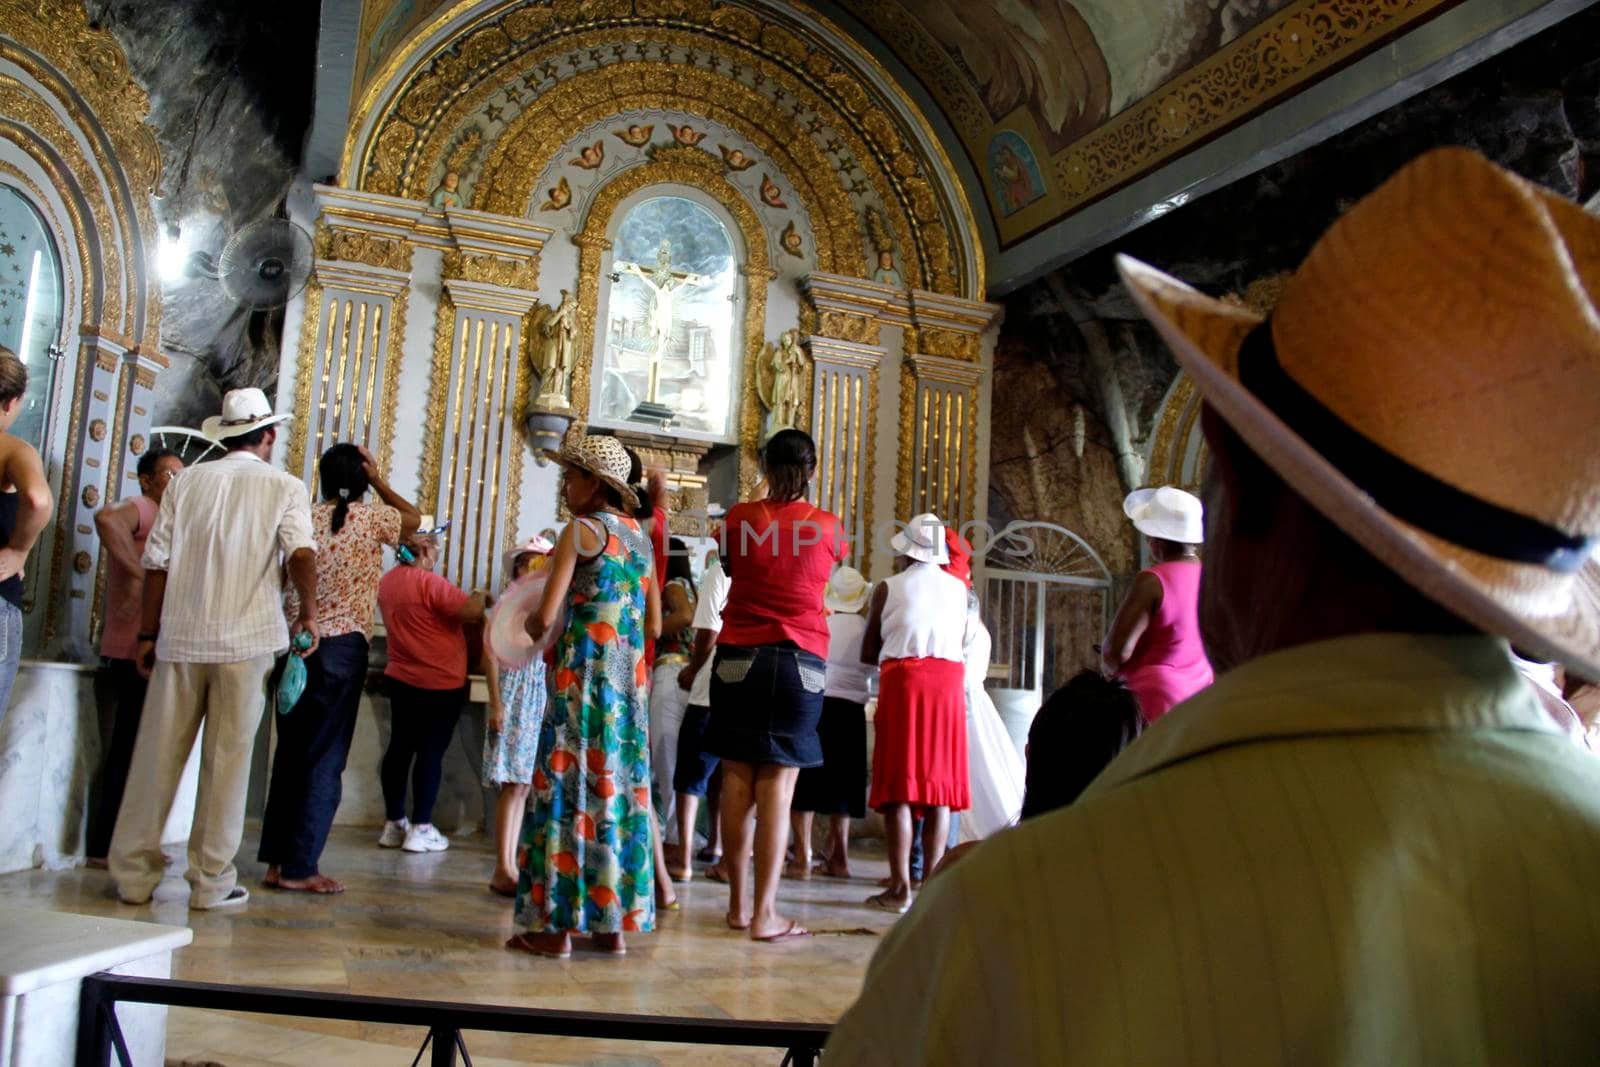 bom jesus da lapa, bahia, brazil - august 3, 2014: devotees during a visit to the Sanctuary of Bom Jesus da Lapa. Miraculous deeds are attributed there.